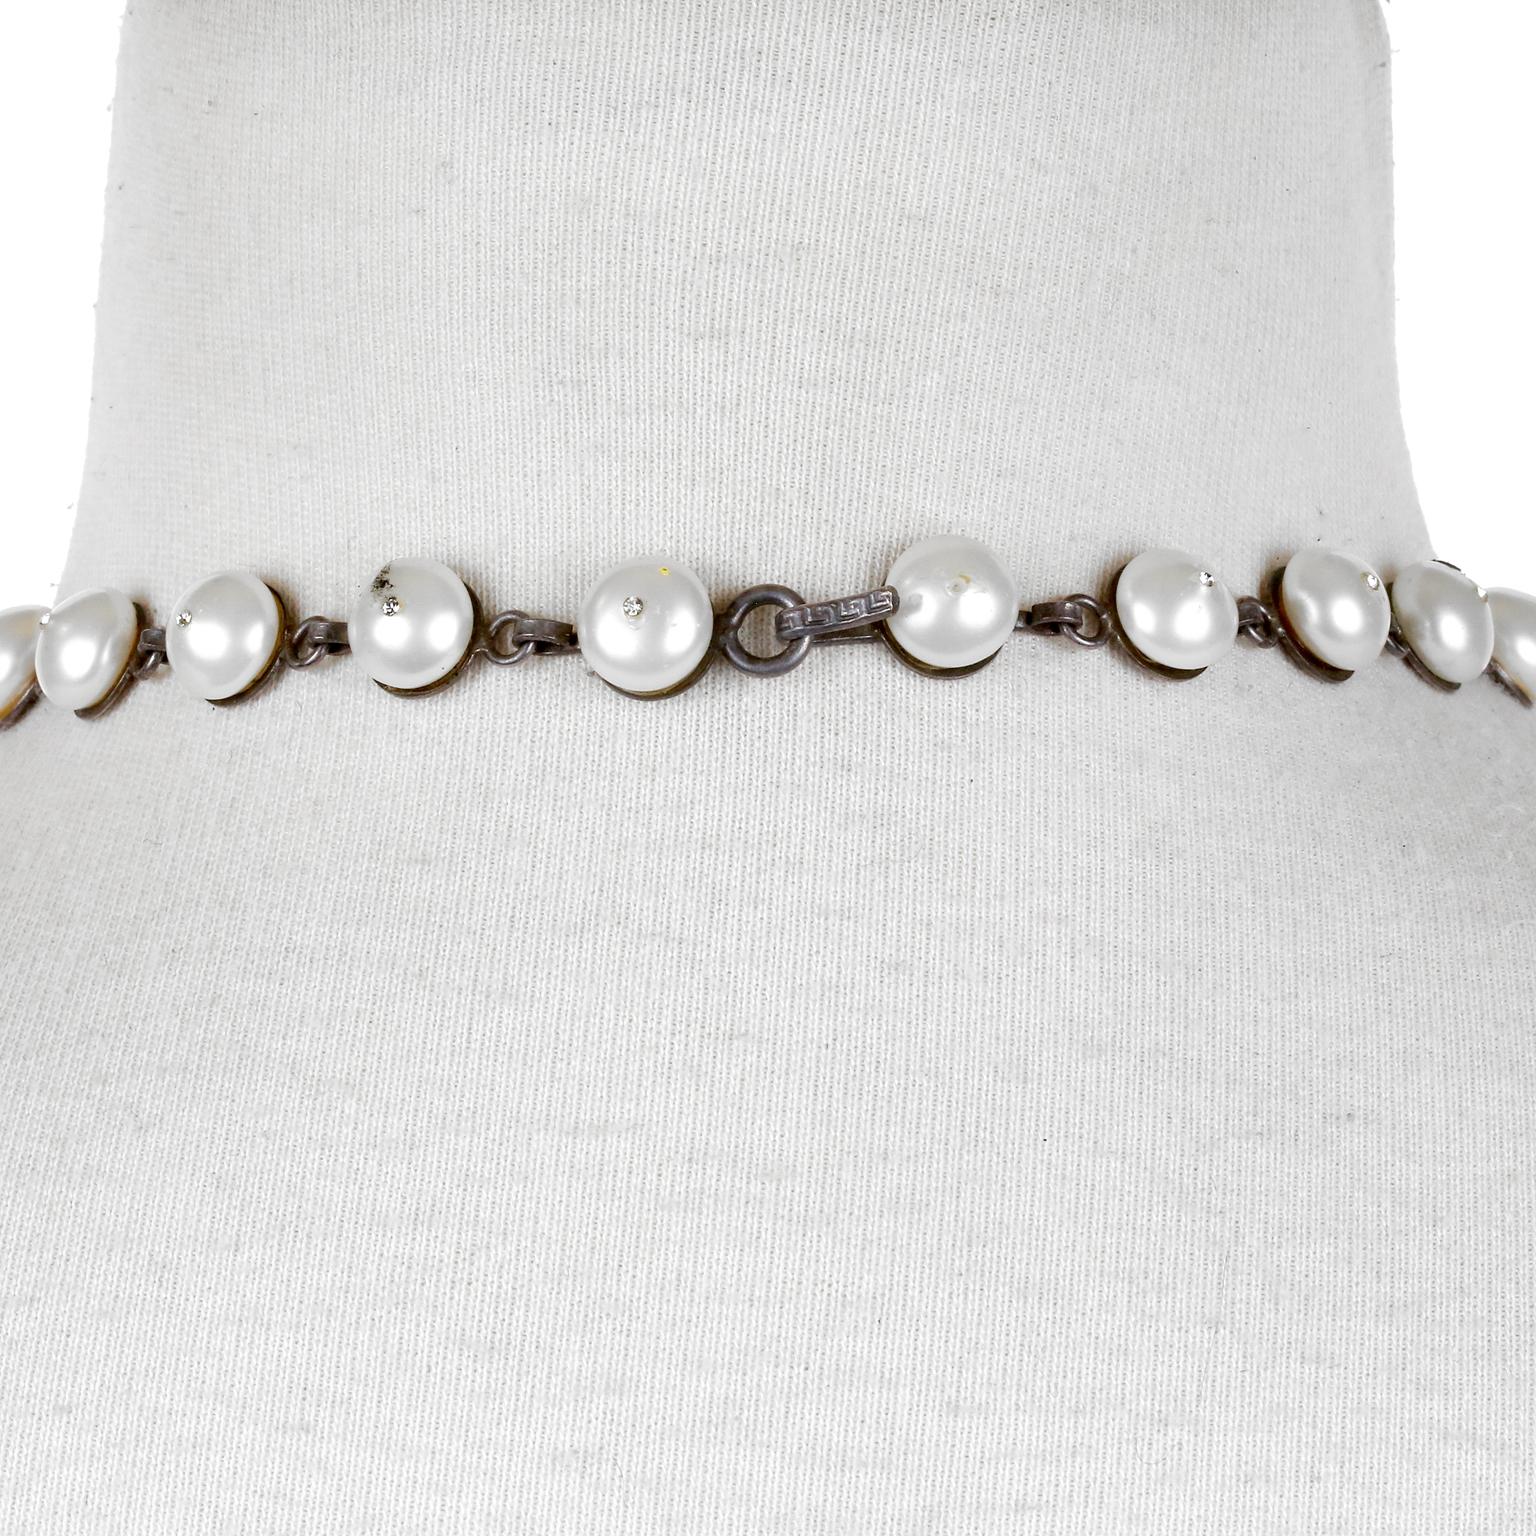 This very early Chanel Gripoix and Pearl Bib Necklace is in excellent vintage condition.  It is a one of a kind highly collectible piece designed by Coco herself from the Diana Vreeland estate sale.  Faux pearl choker with red and green dripping